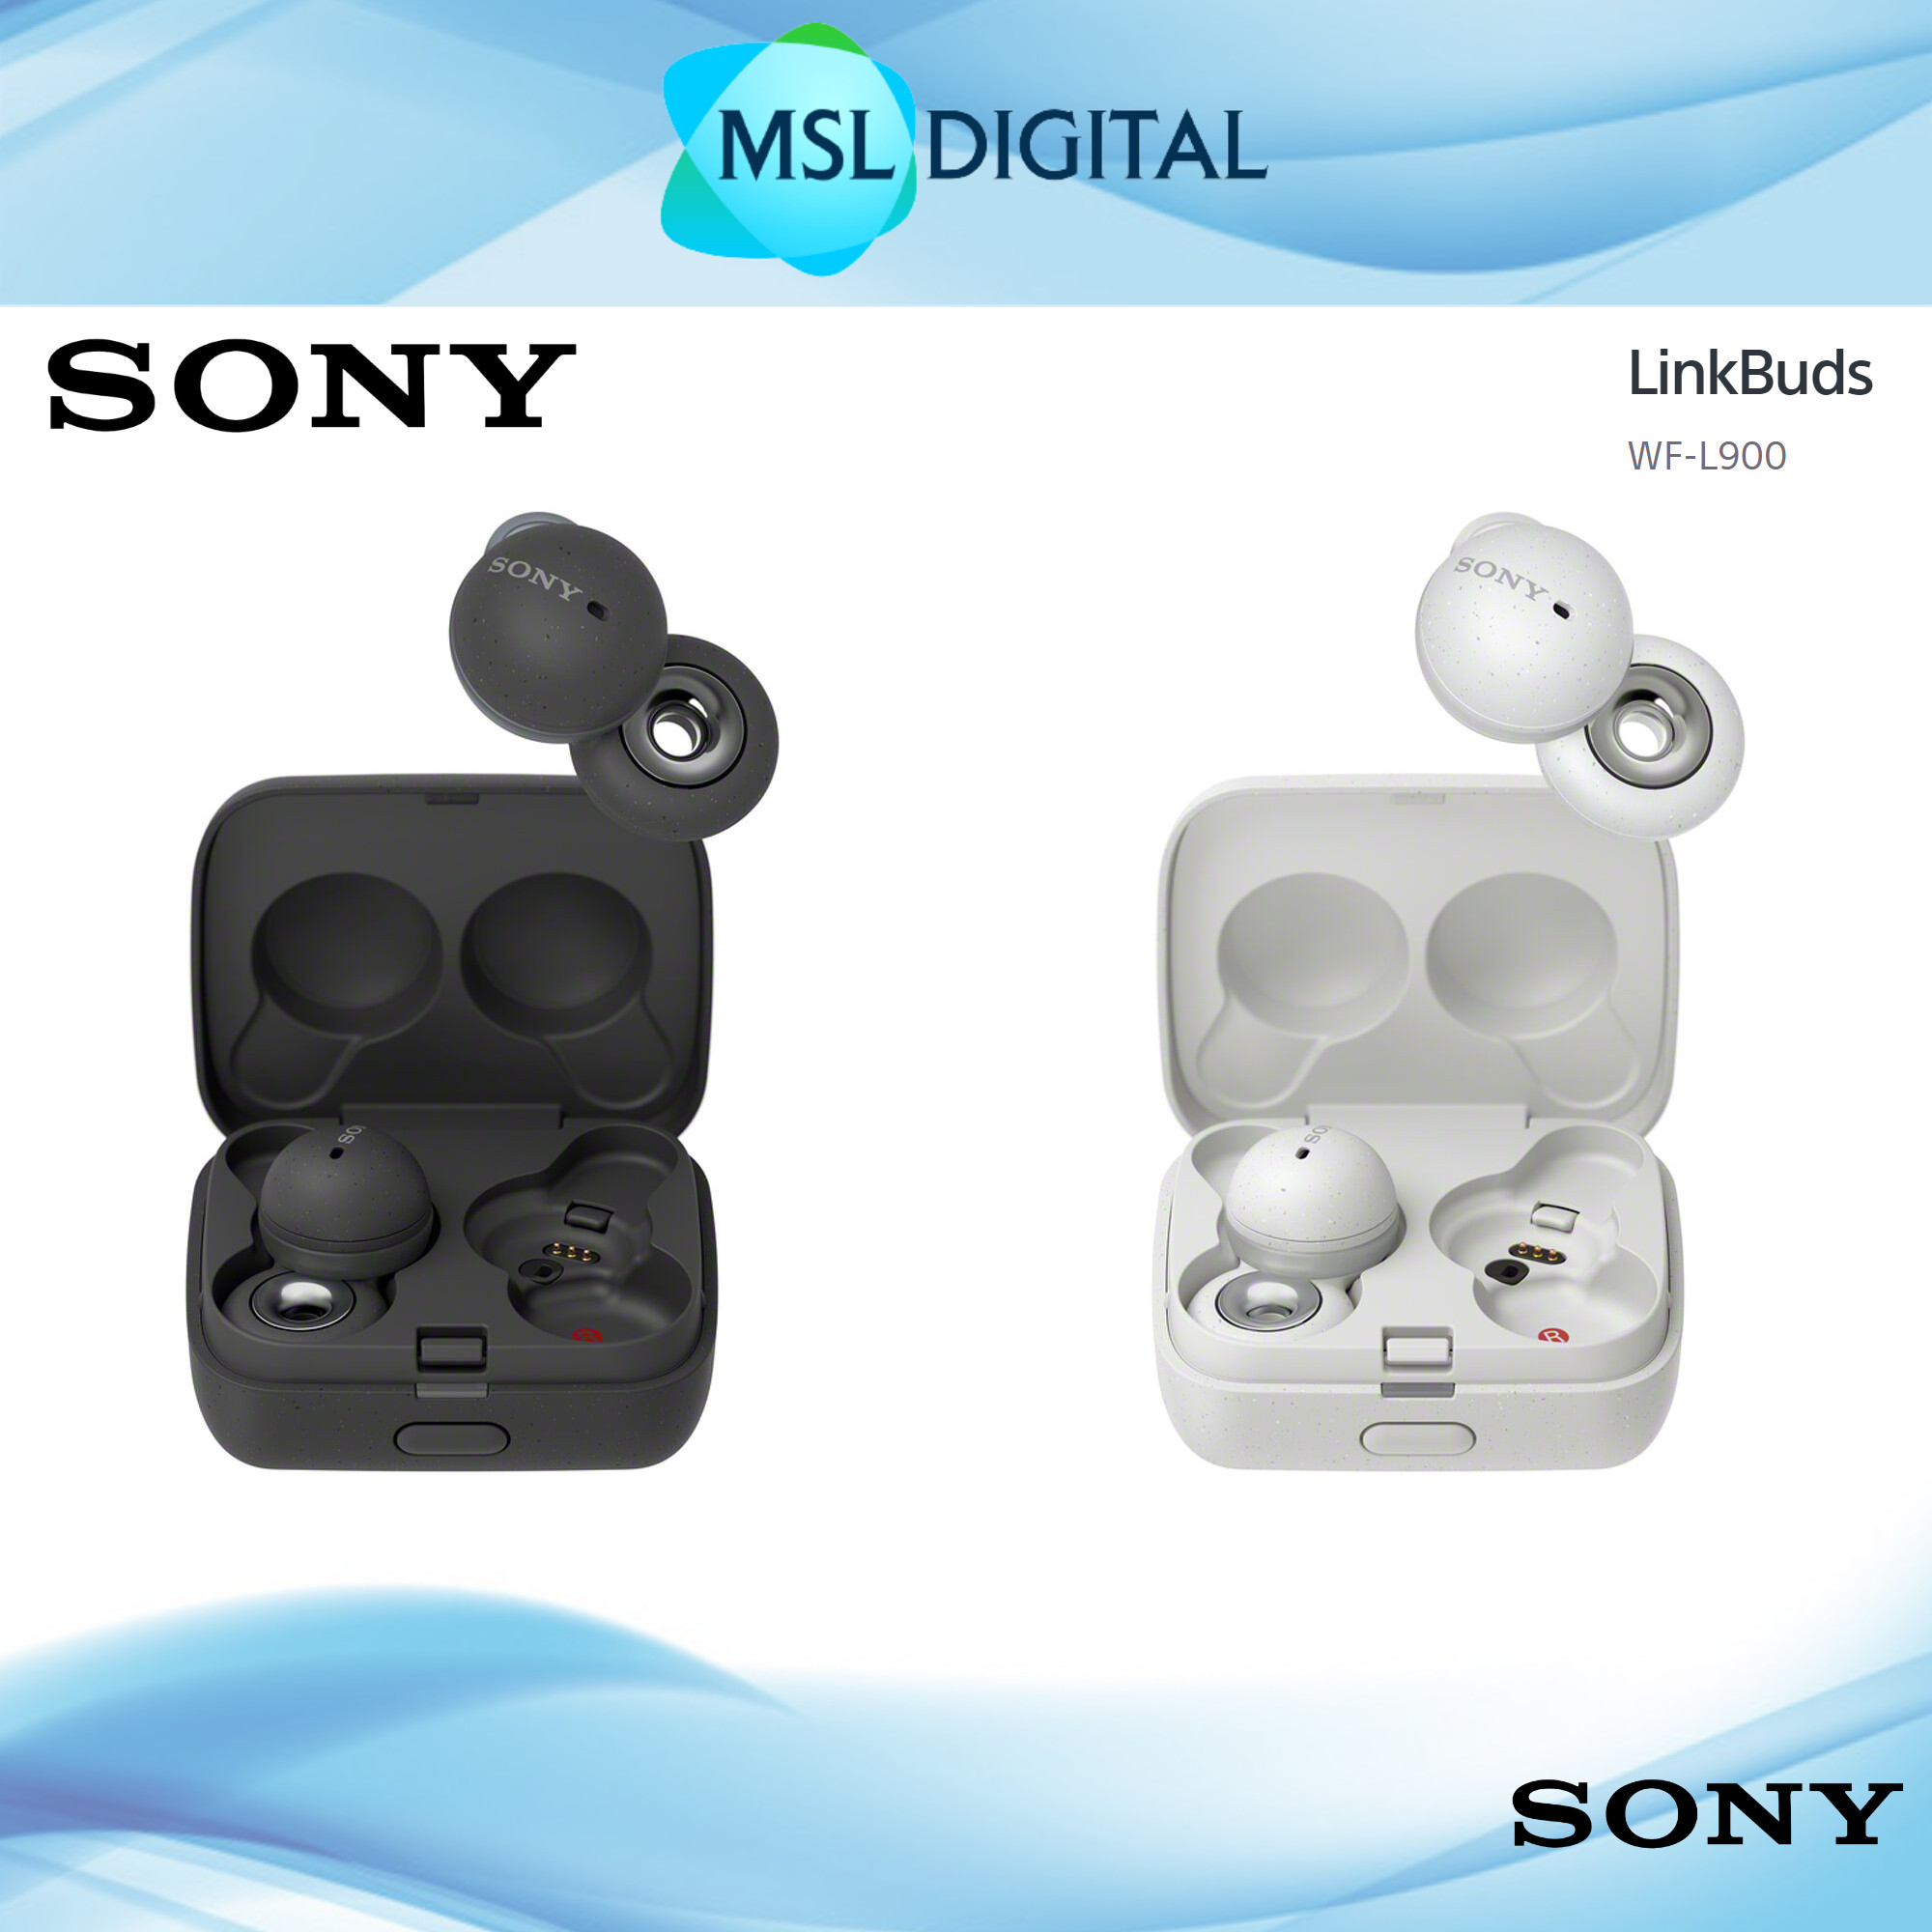 Sony WF-L900 LinkBuds Earbuds | Ultra Compact and Light High Call